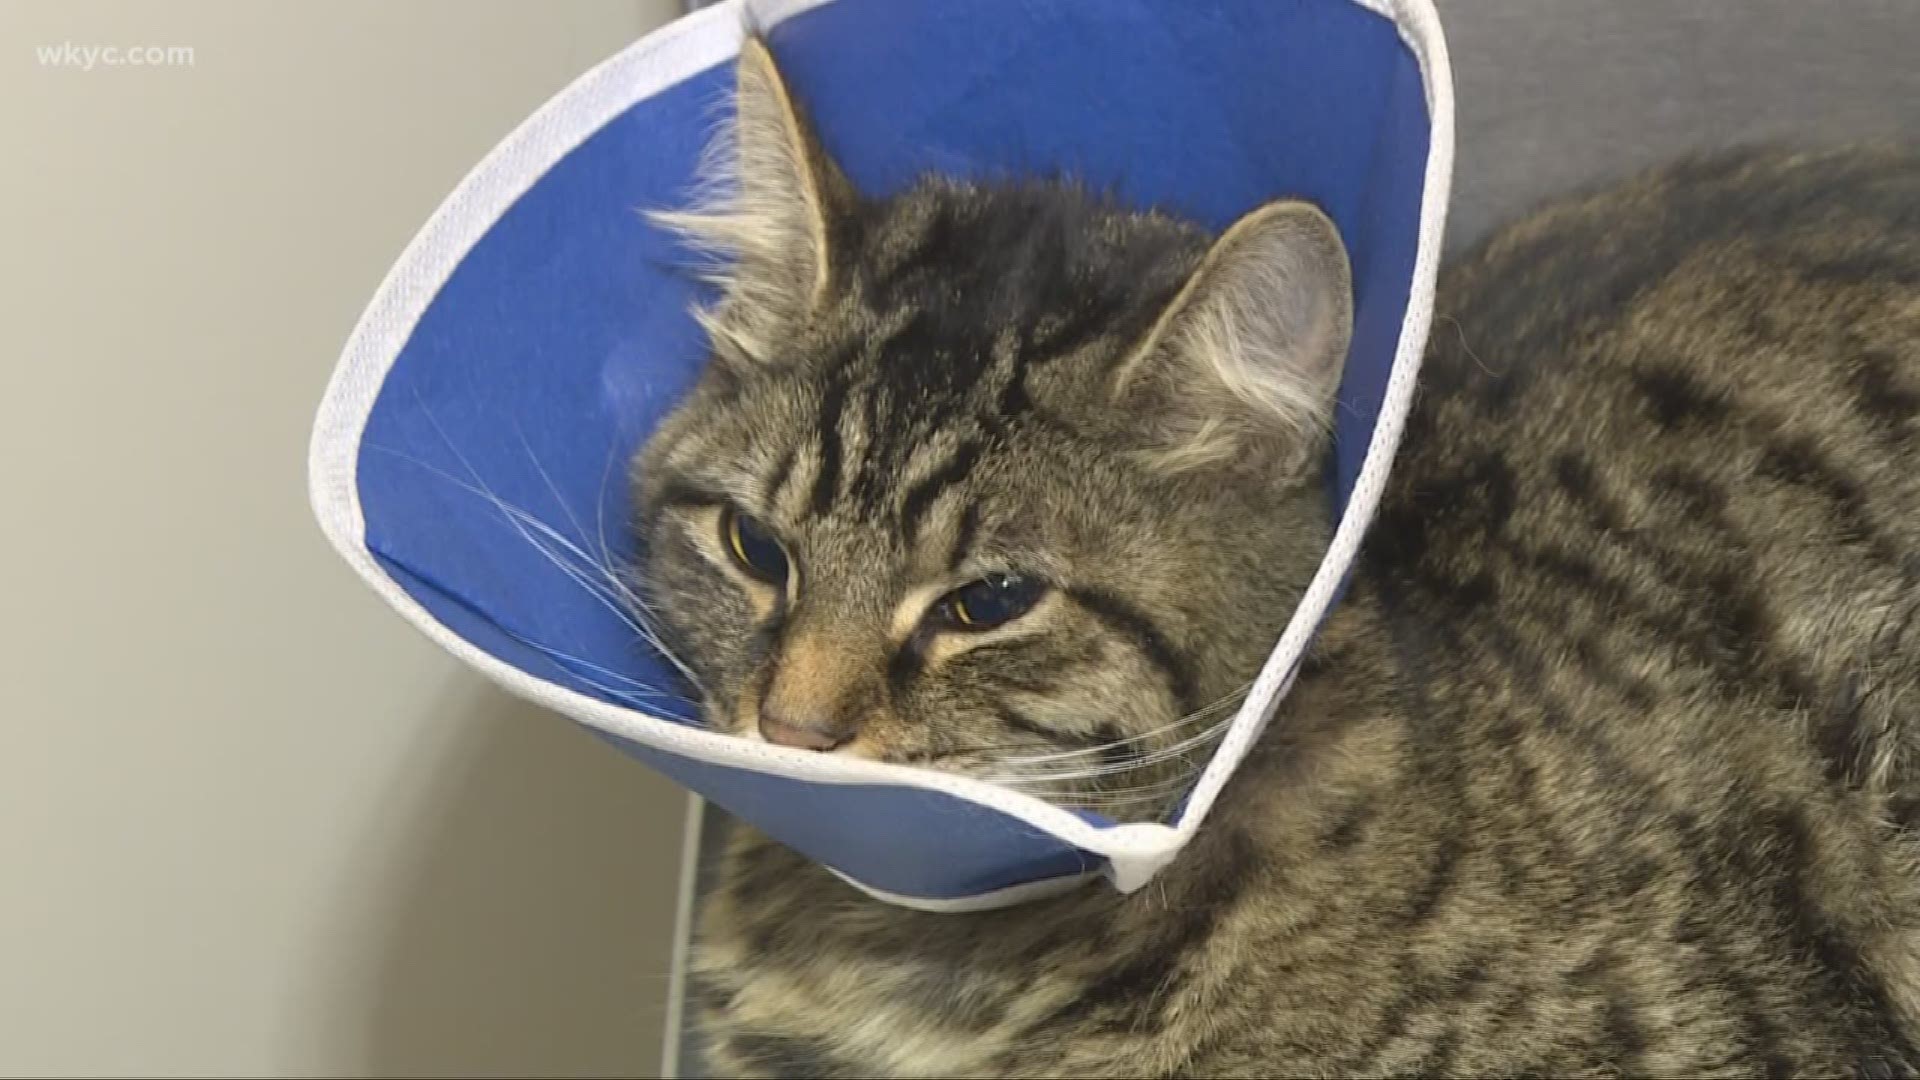 Reward in injured cat case grows to at least $18,000; Katy P. continues to recover